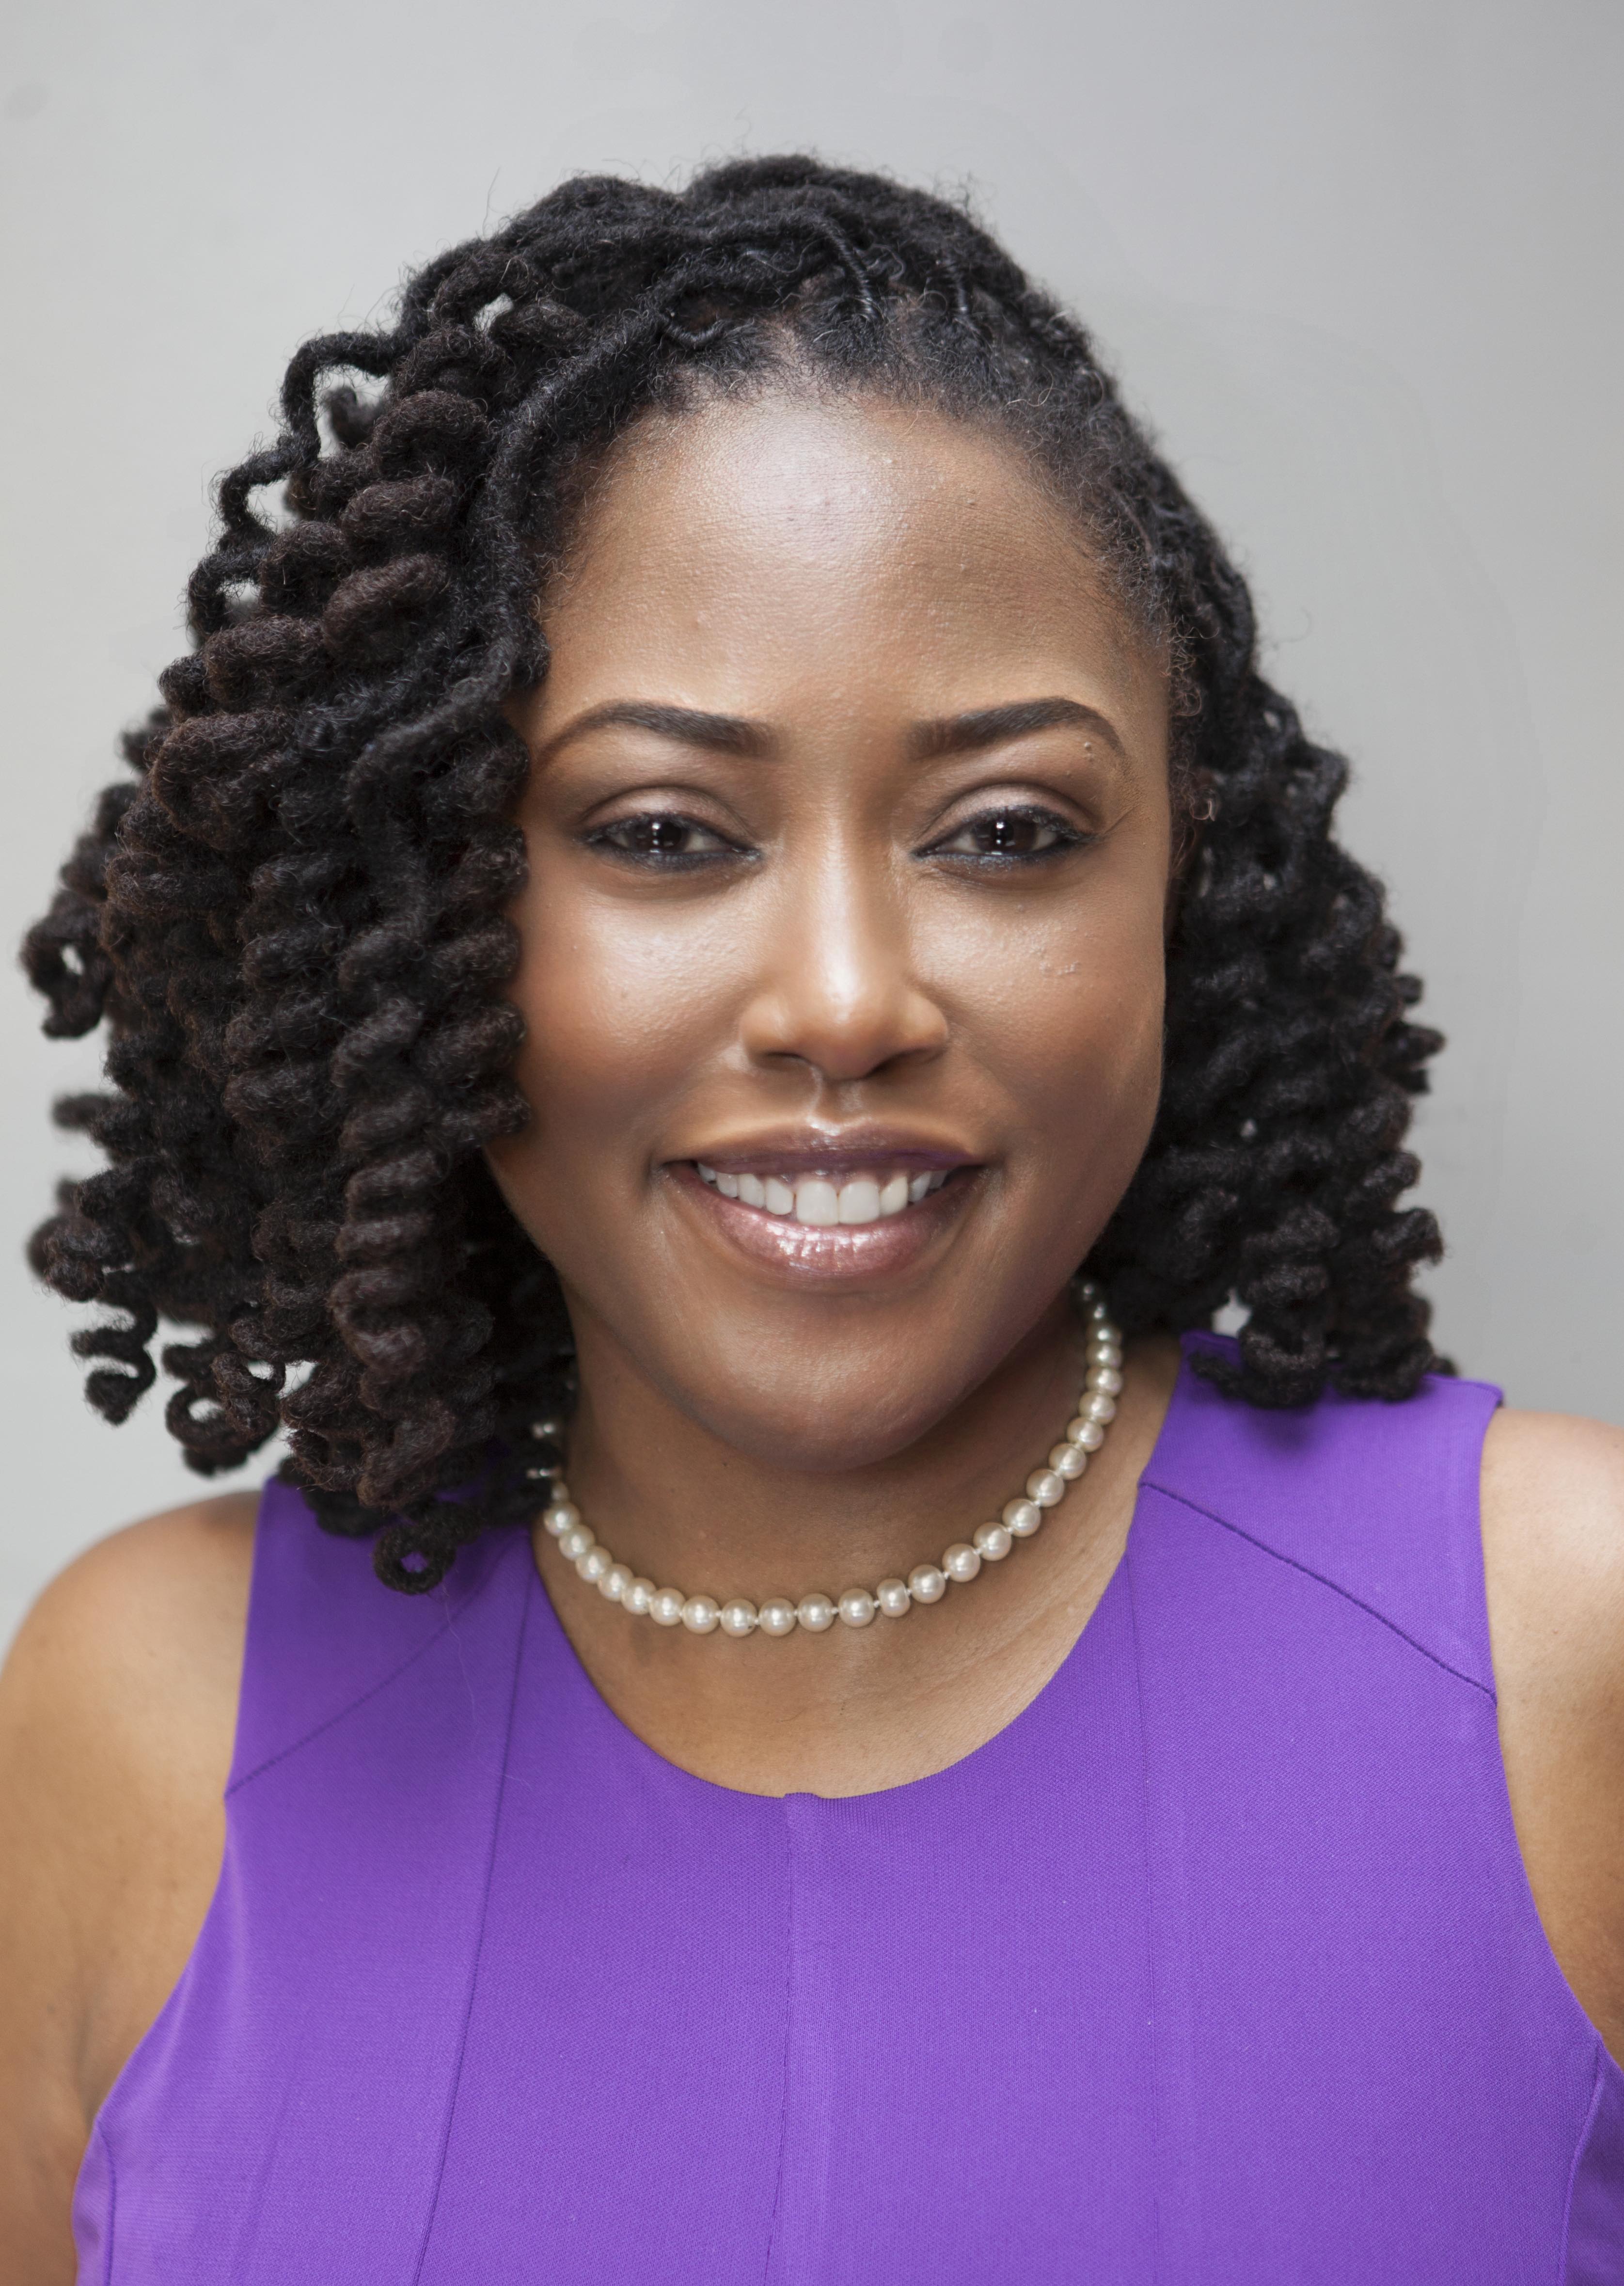 Michele Ware, CEO of Hoodwinked Escape, Inspired to Jump into Entrepreneurship